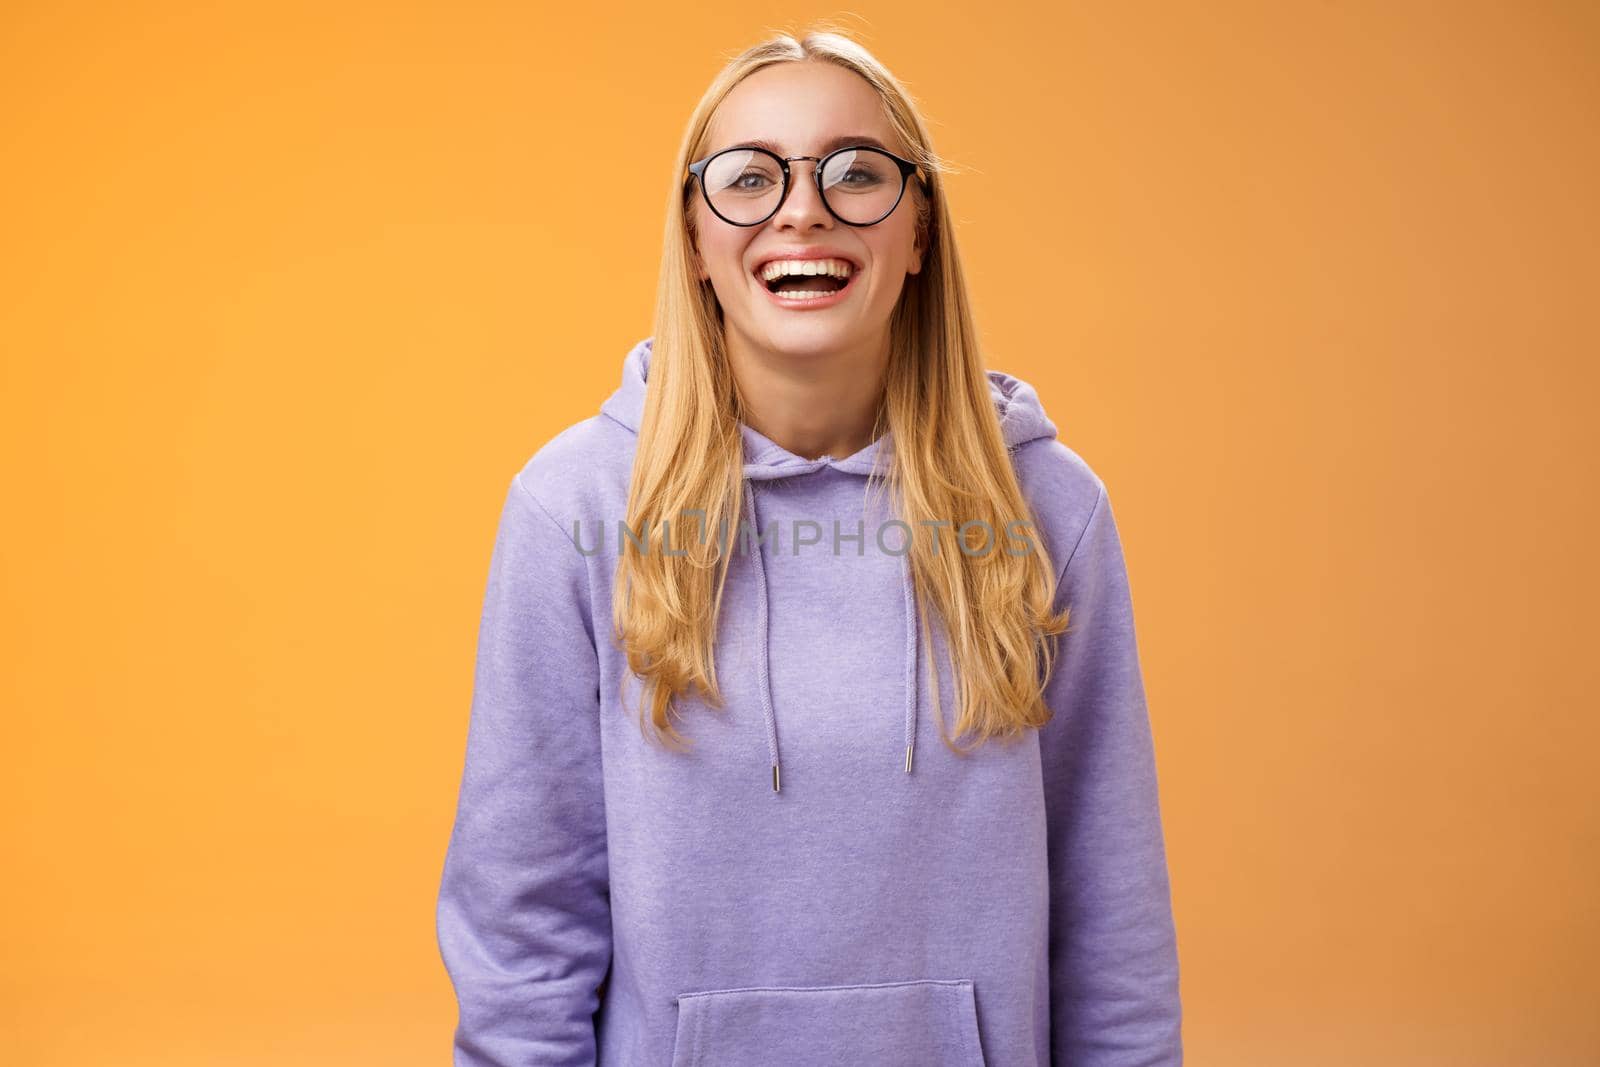 Charismatic joyful charming smiling female university straight a student in glasses purple cozy hoodie grinning laughing happily glad invited hand out classmates standing orange background.